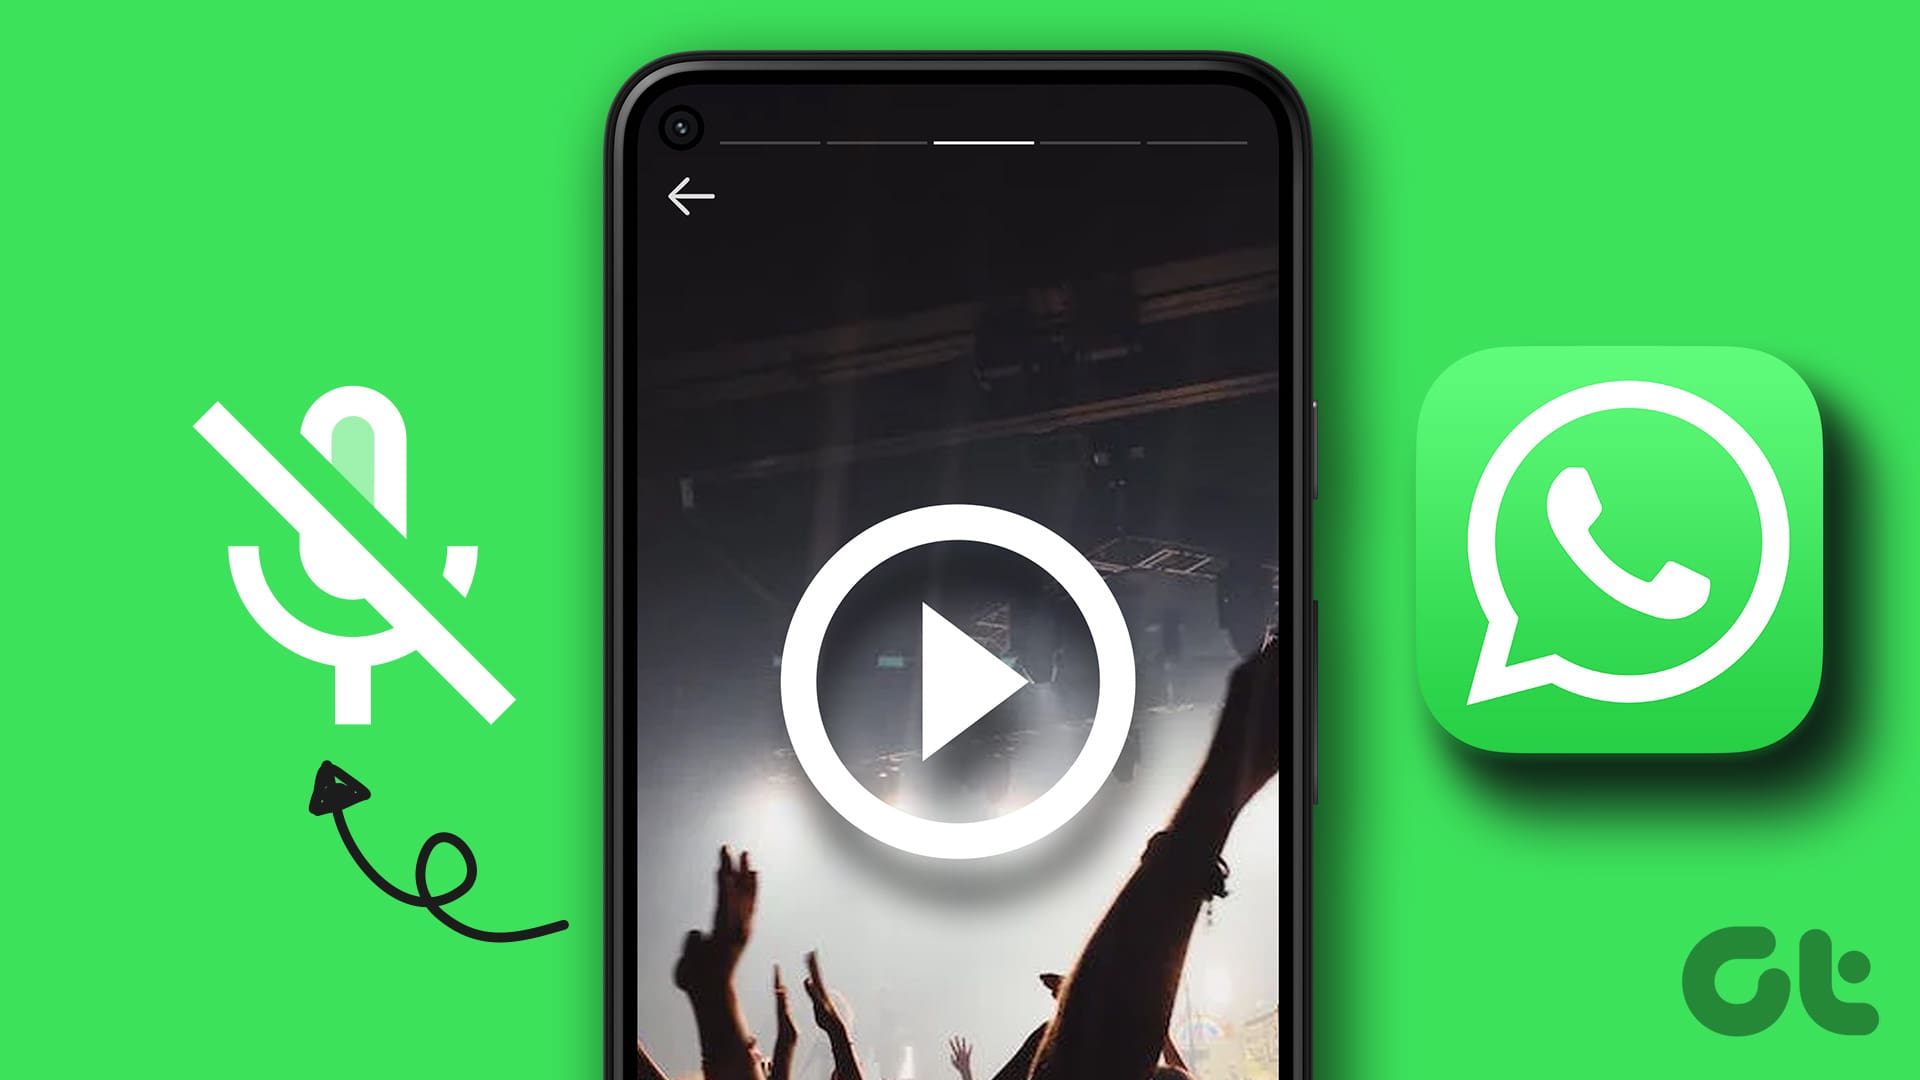 WhatsApp now has the ability to share videos in HD